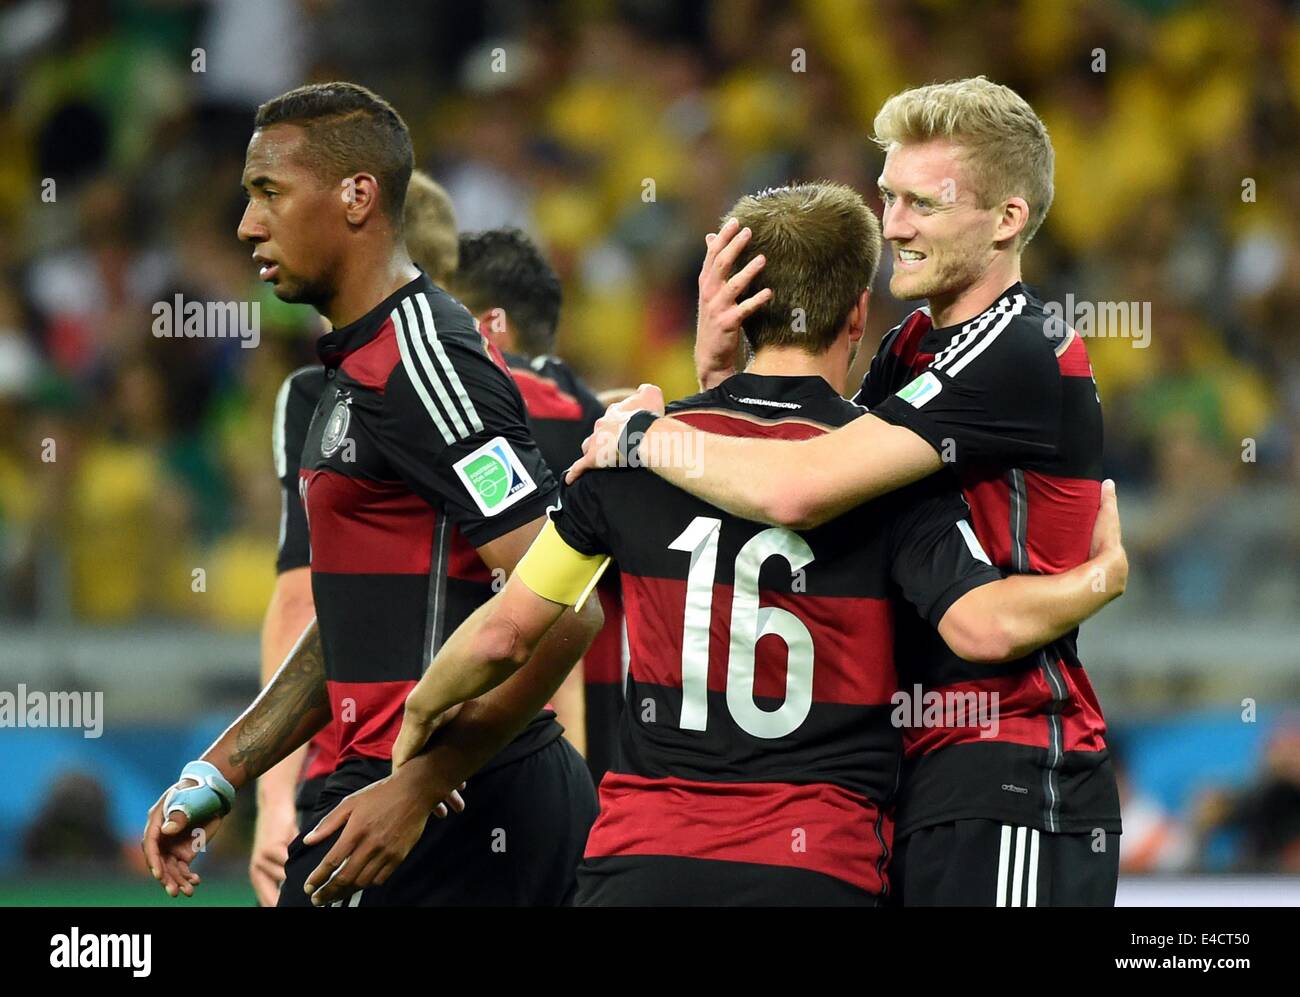 Belo Horizonte, Brazil. 8th July, 2014. Germany's Andre Schuerrle (1st R) celebrates with Philipp Lahm (2nd R) after scoring during a semifinal match between Brazil and Germany of 2014 FIFA World Cup at the Estadio Mineirao Stadium in Belo Horizonte, Brazil, on July 8, 2014. Germany won 7-1 over Brazil and qualified for the final on Tuesday. Credit:  Liu Dawei/Xinhua/Alamy Live News Stock Photo